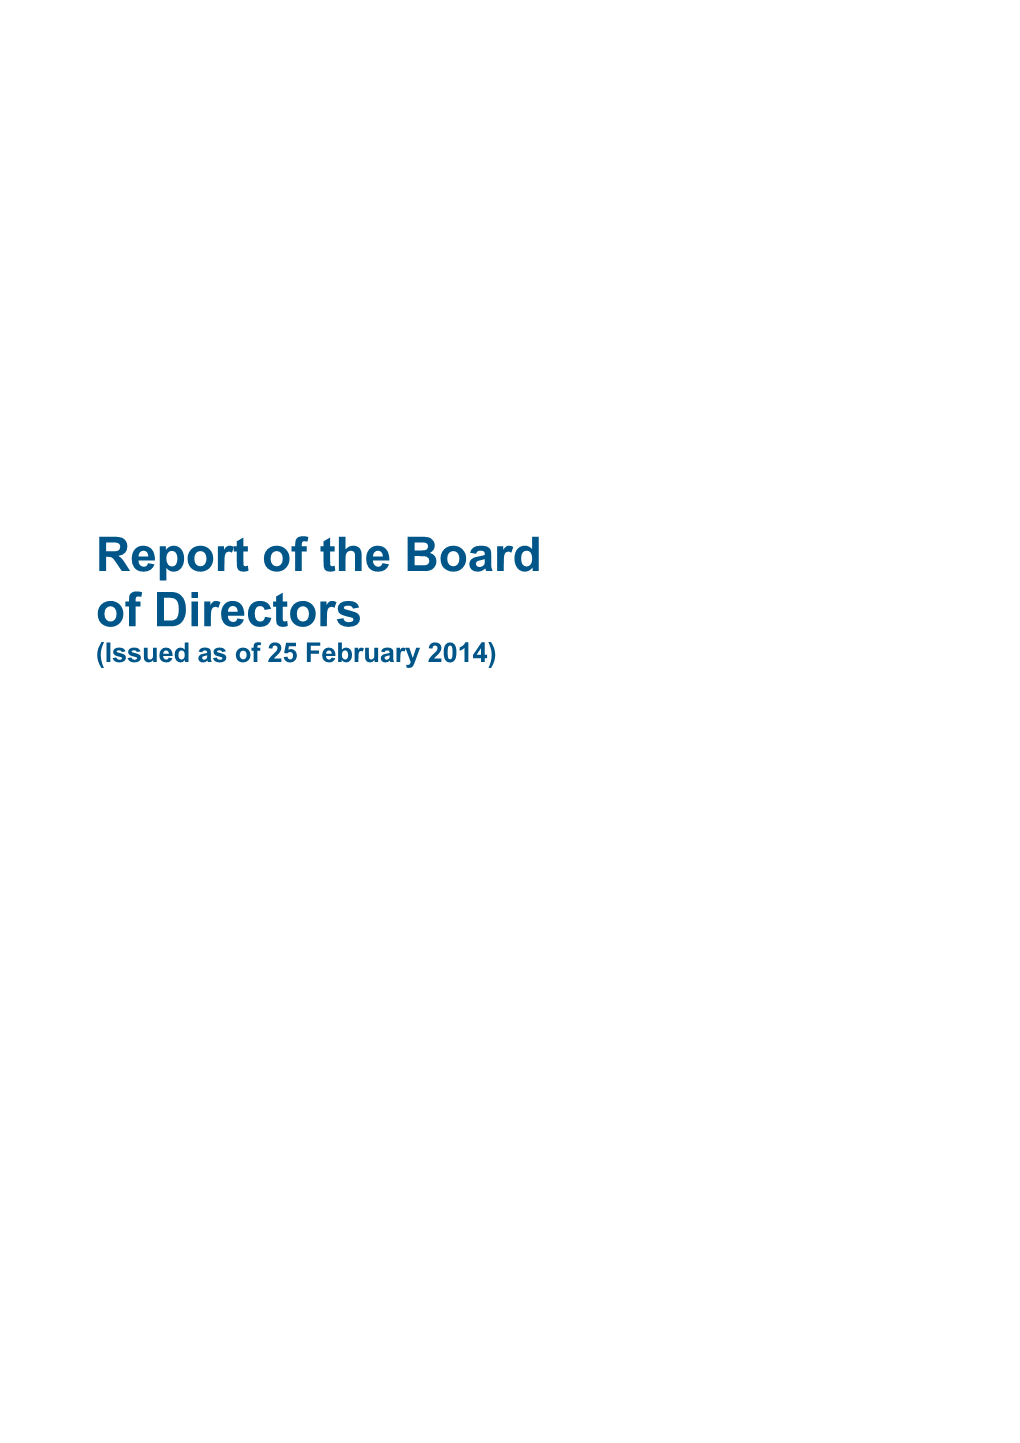 Report of the Board of Directors 2013 0.88 MB